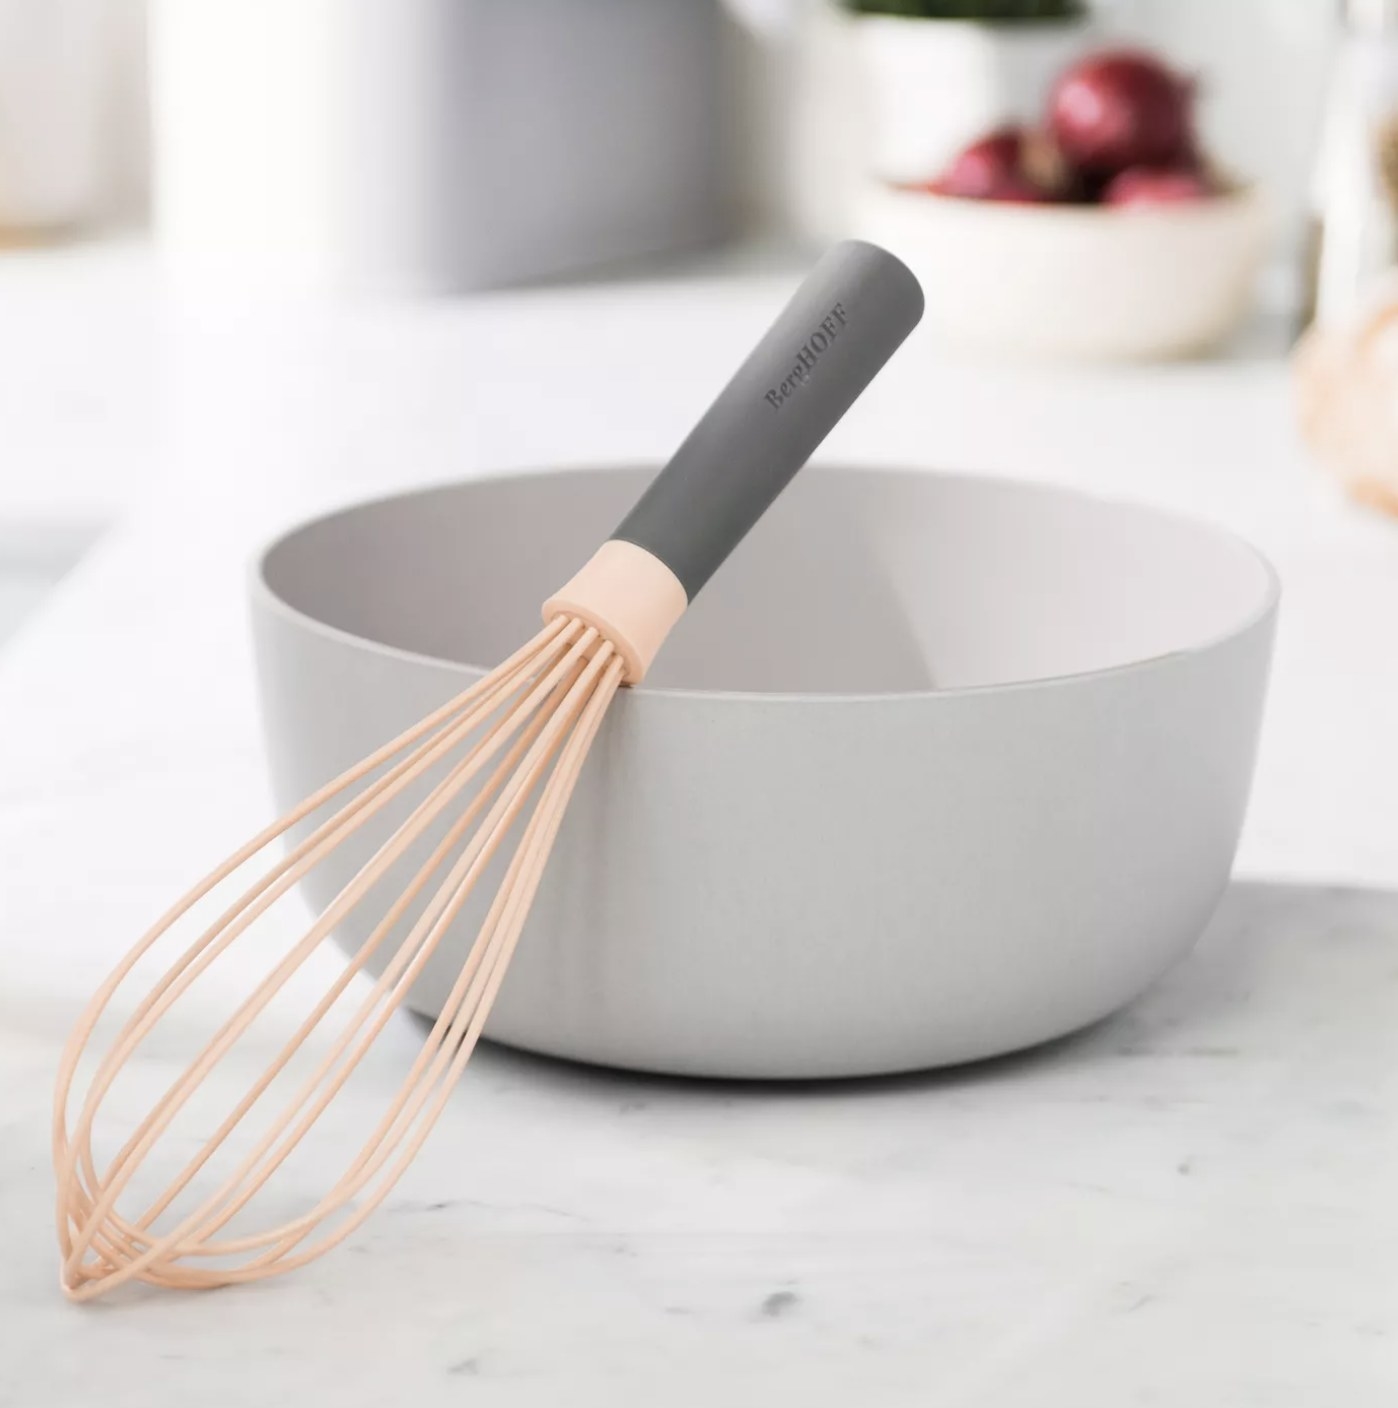 A peach-colored whisk